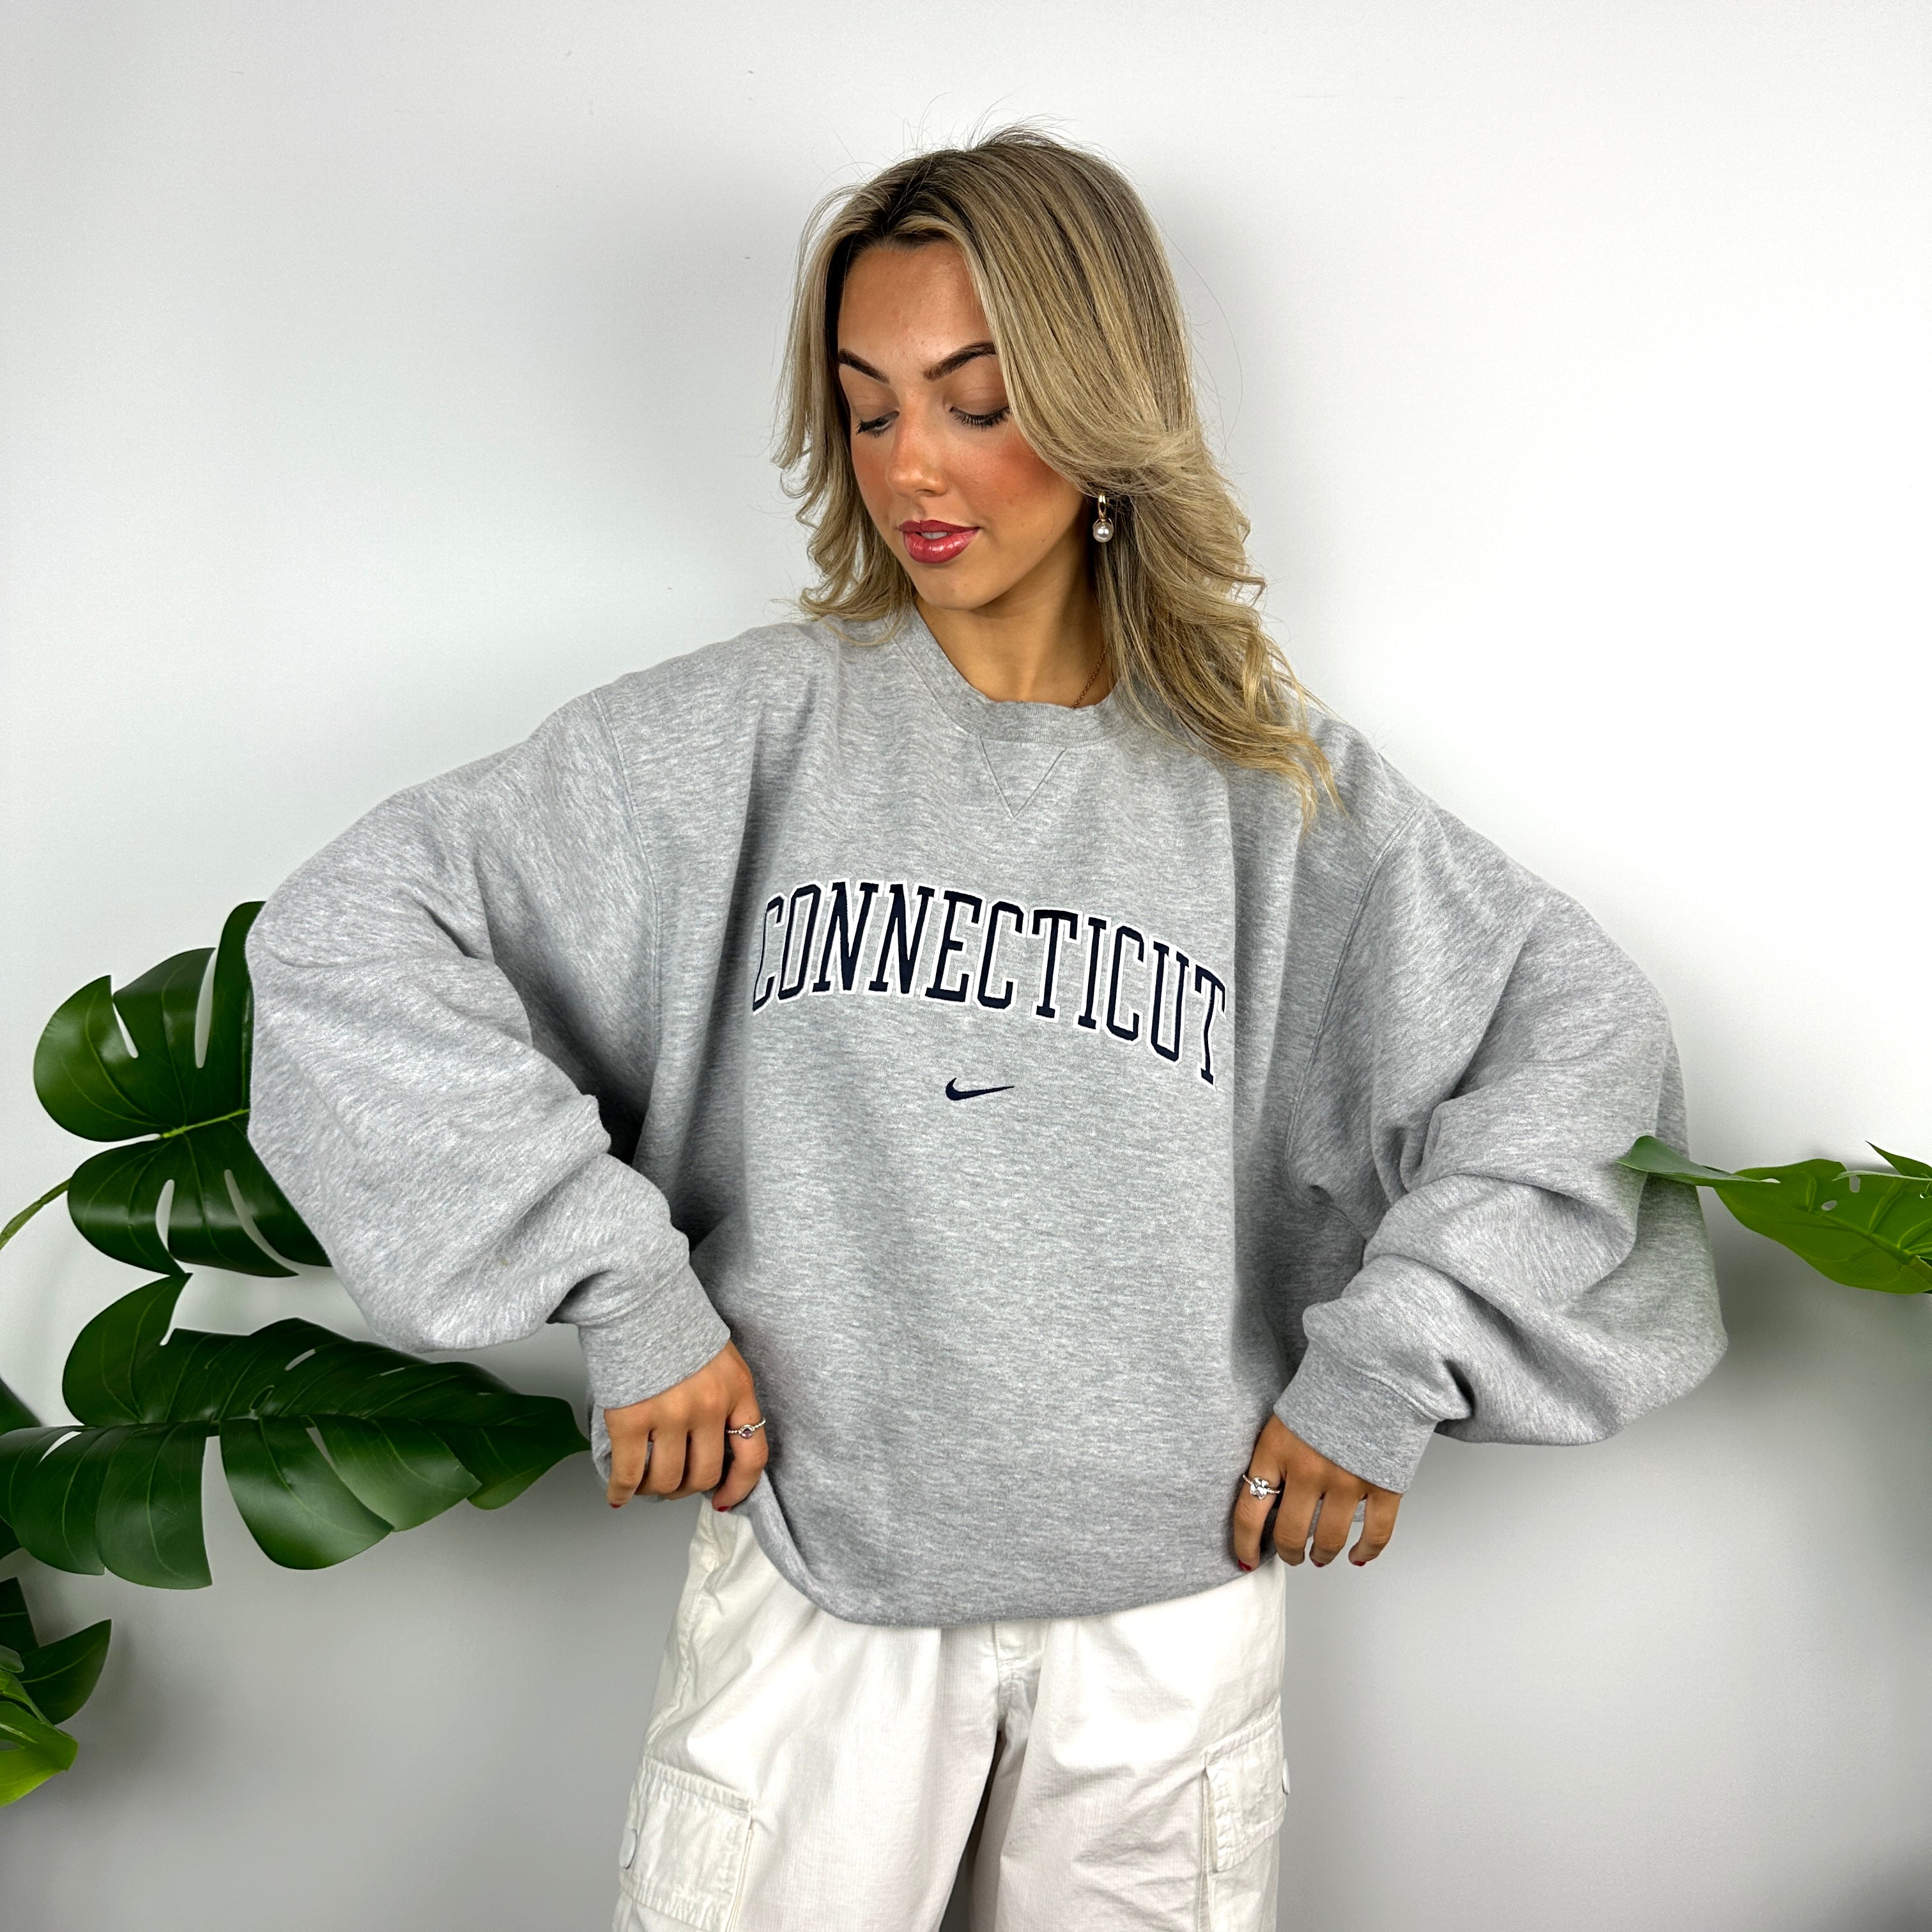 Nike x Connecticut Grey Embroidered Spell Out Sweatshirt (XL)